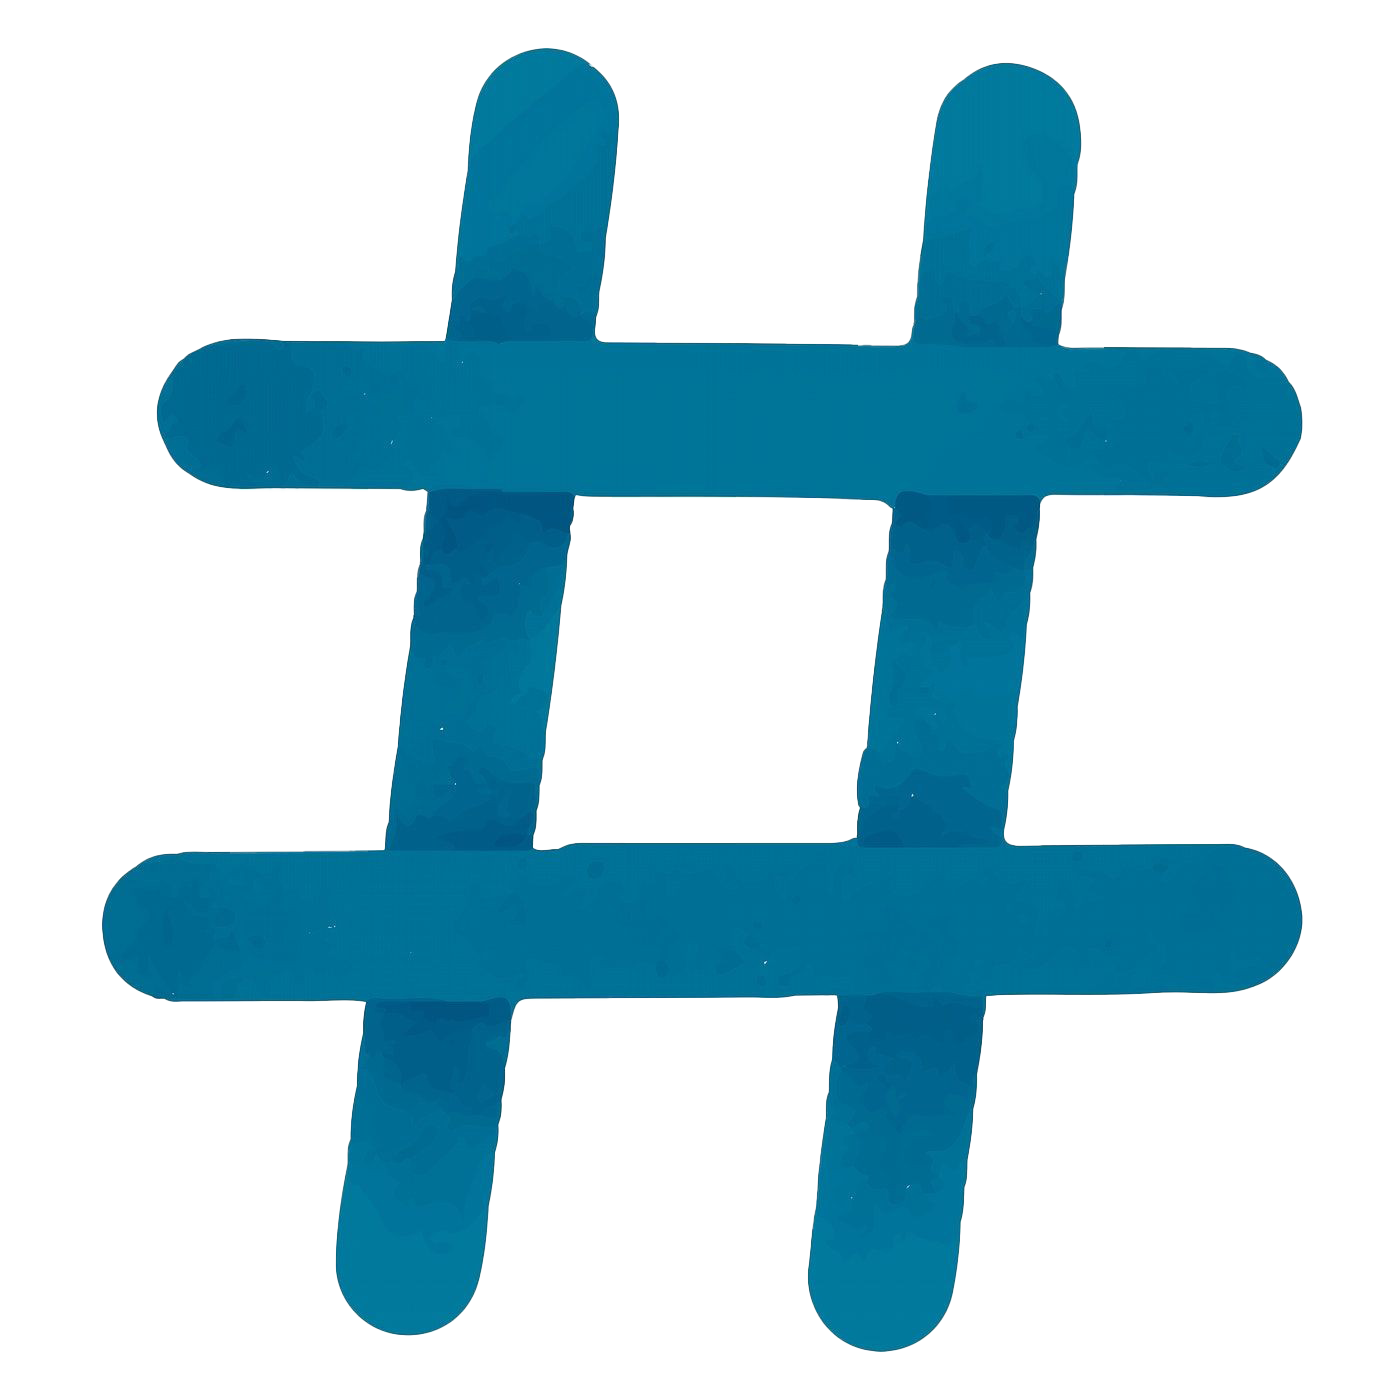 Blue Hashtag PNG Image